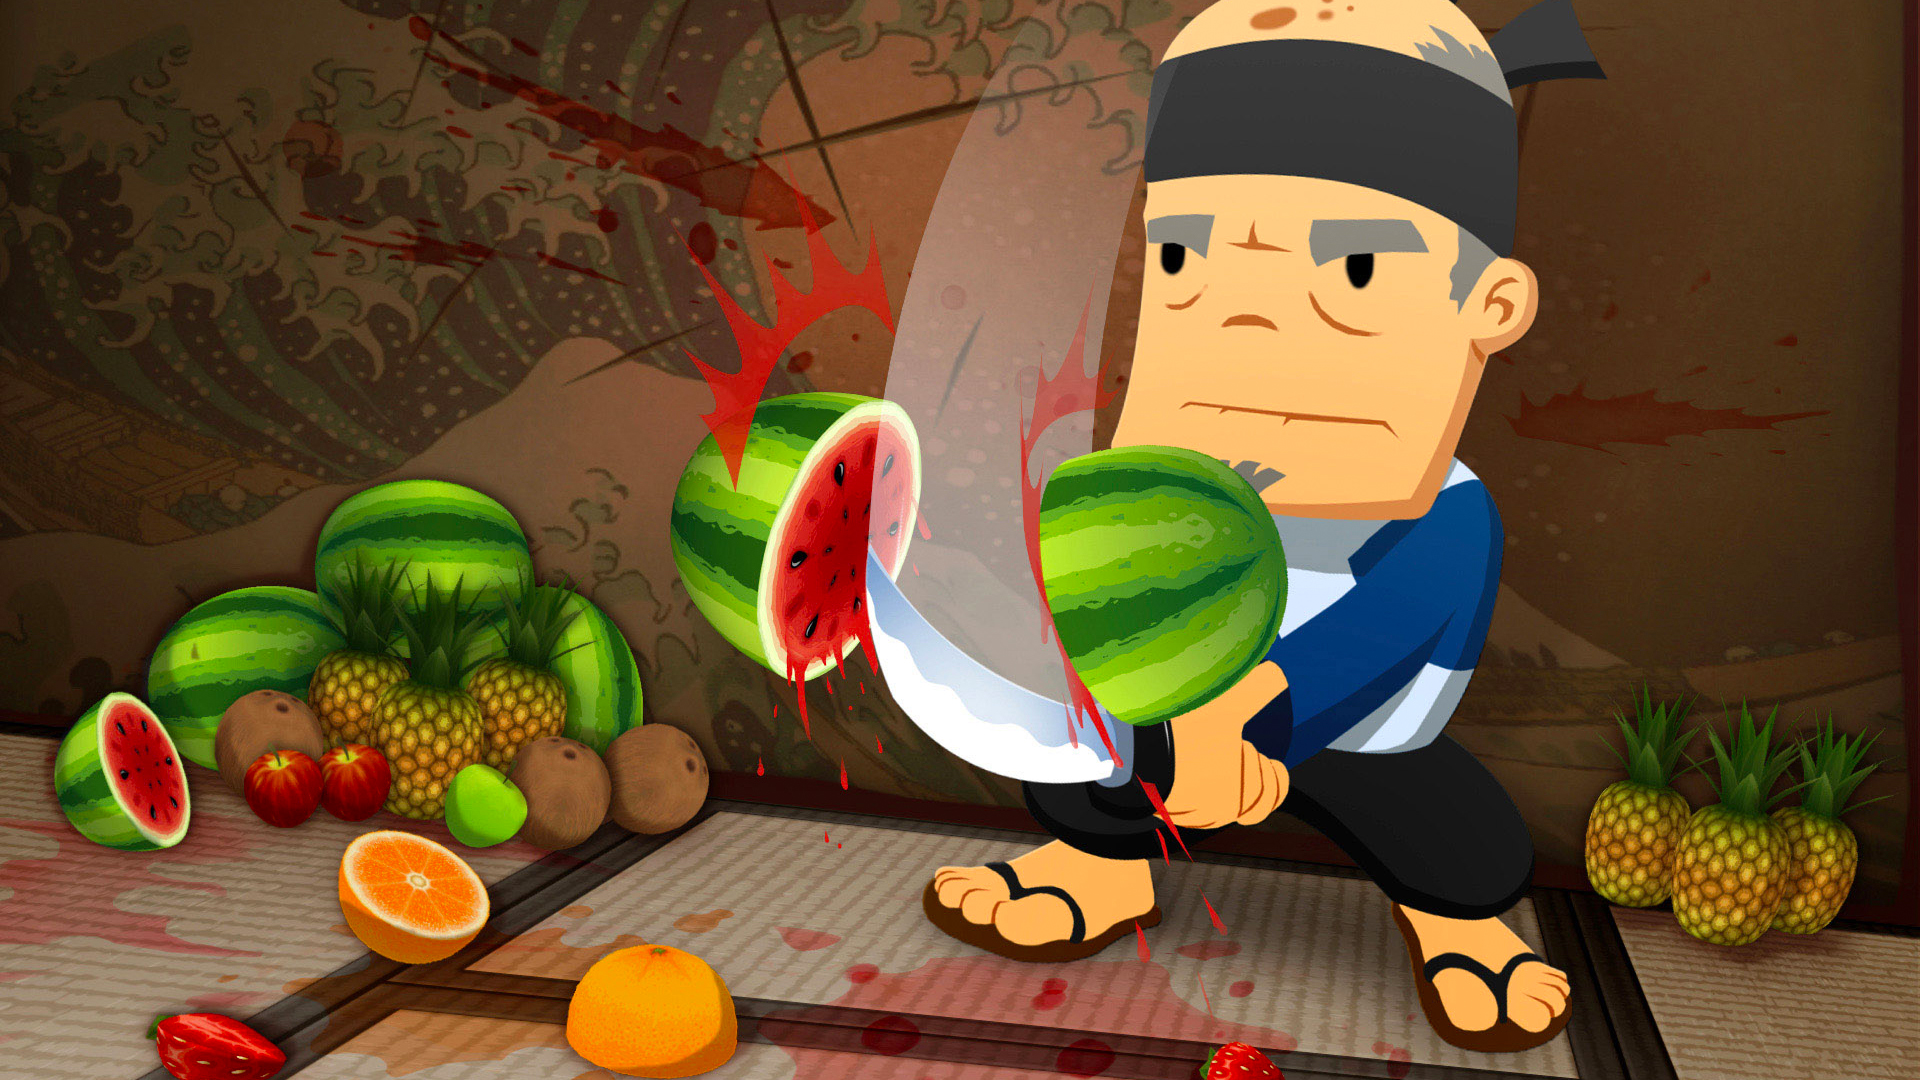 Fruit Ninja is being made into a live-action film